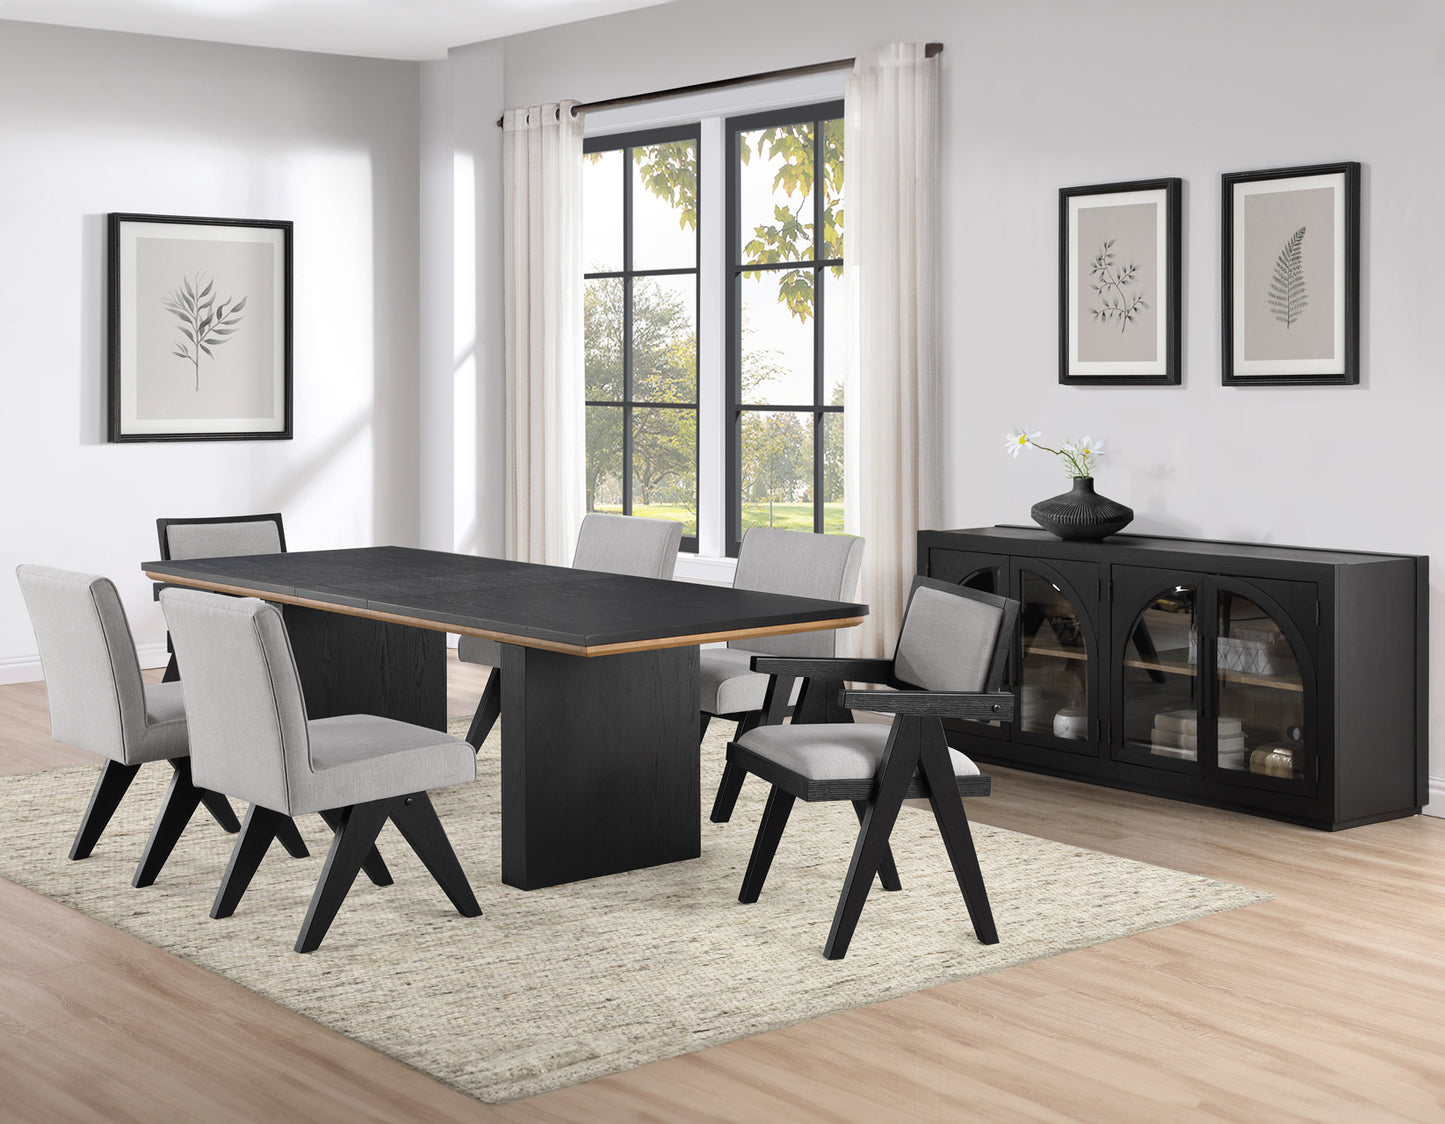 Magnolia 80-96″ Table 5-Piece Arm Chair Dining Set